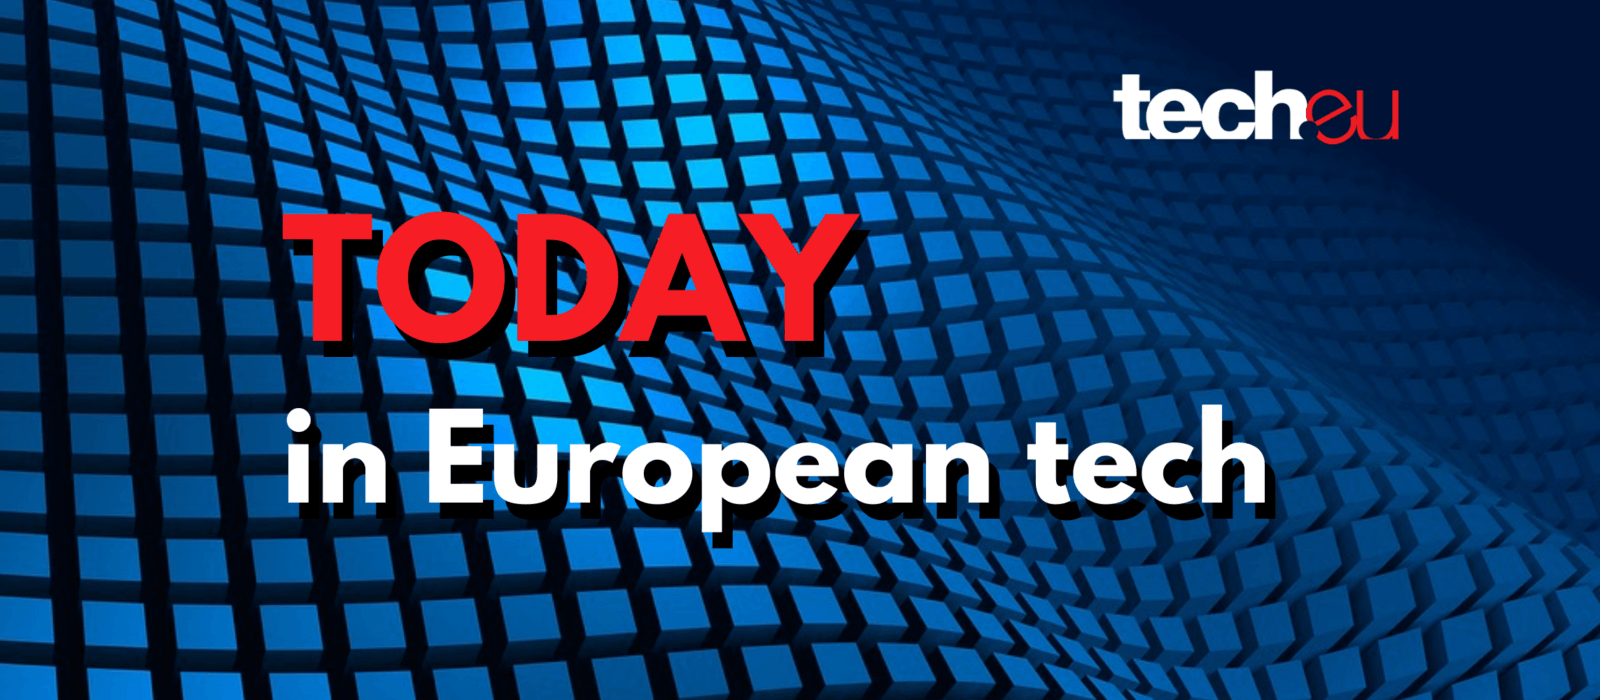 Today in European Tech: German groups file Apple antitrust complaint, Dutch firm Azerion secures €200 million, and more